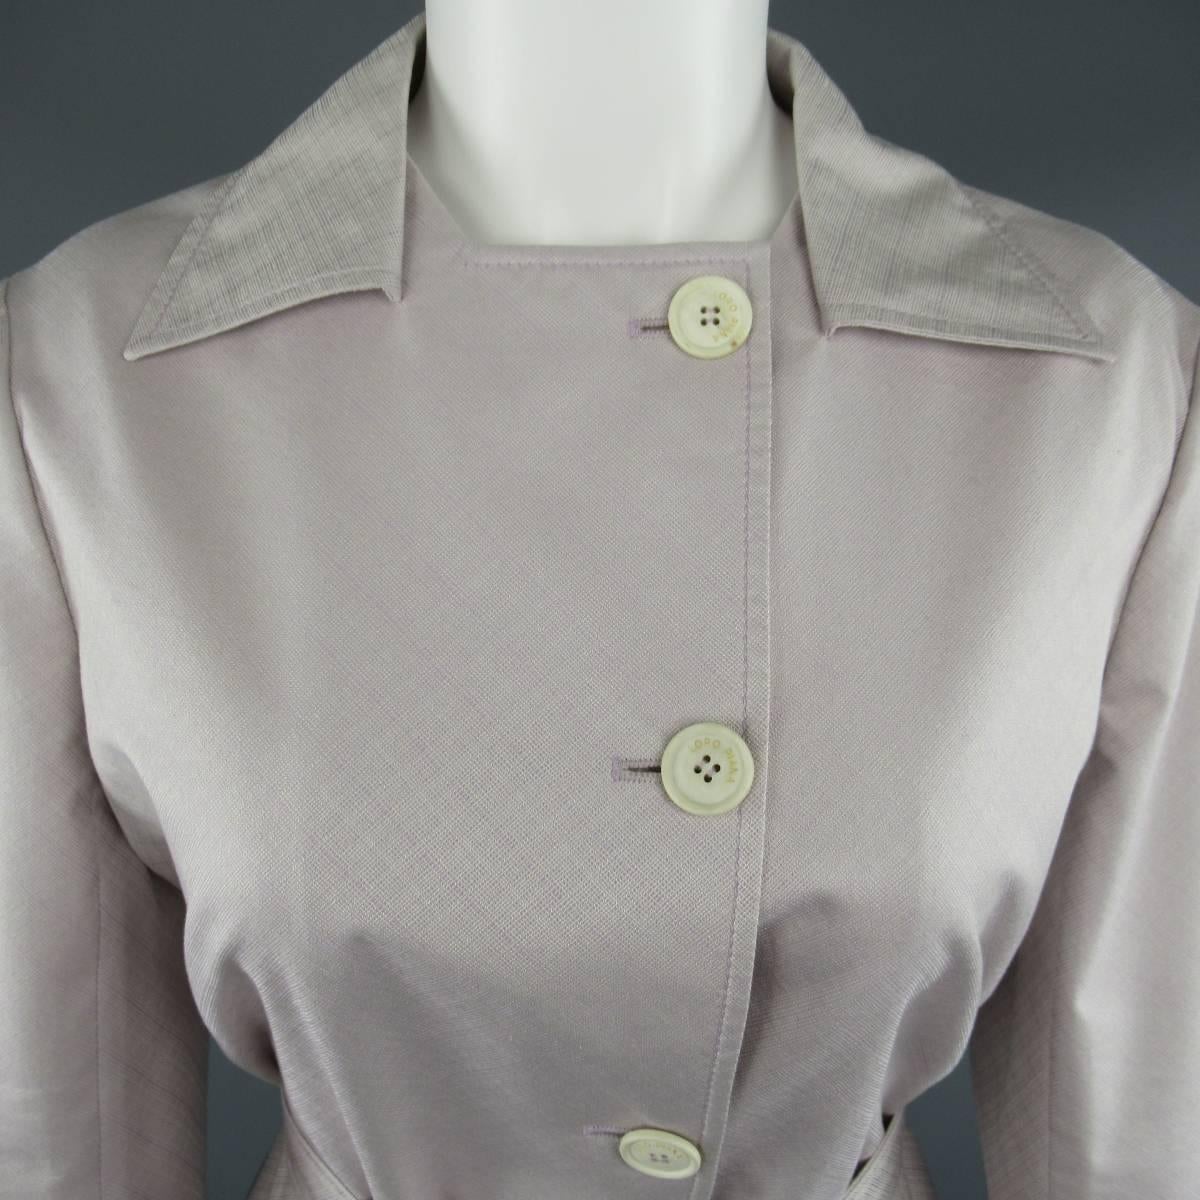 LORO PIANA light weight trench coat comes in a light lavender lilac pink textured cotton silk blend fabric and features a pointed collar, single breasted button up front, epaulet cuff sleeves, and belted tie waist.  Made in Italy.

Excellent